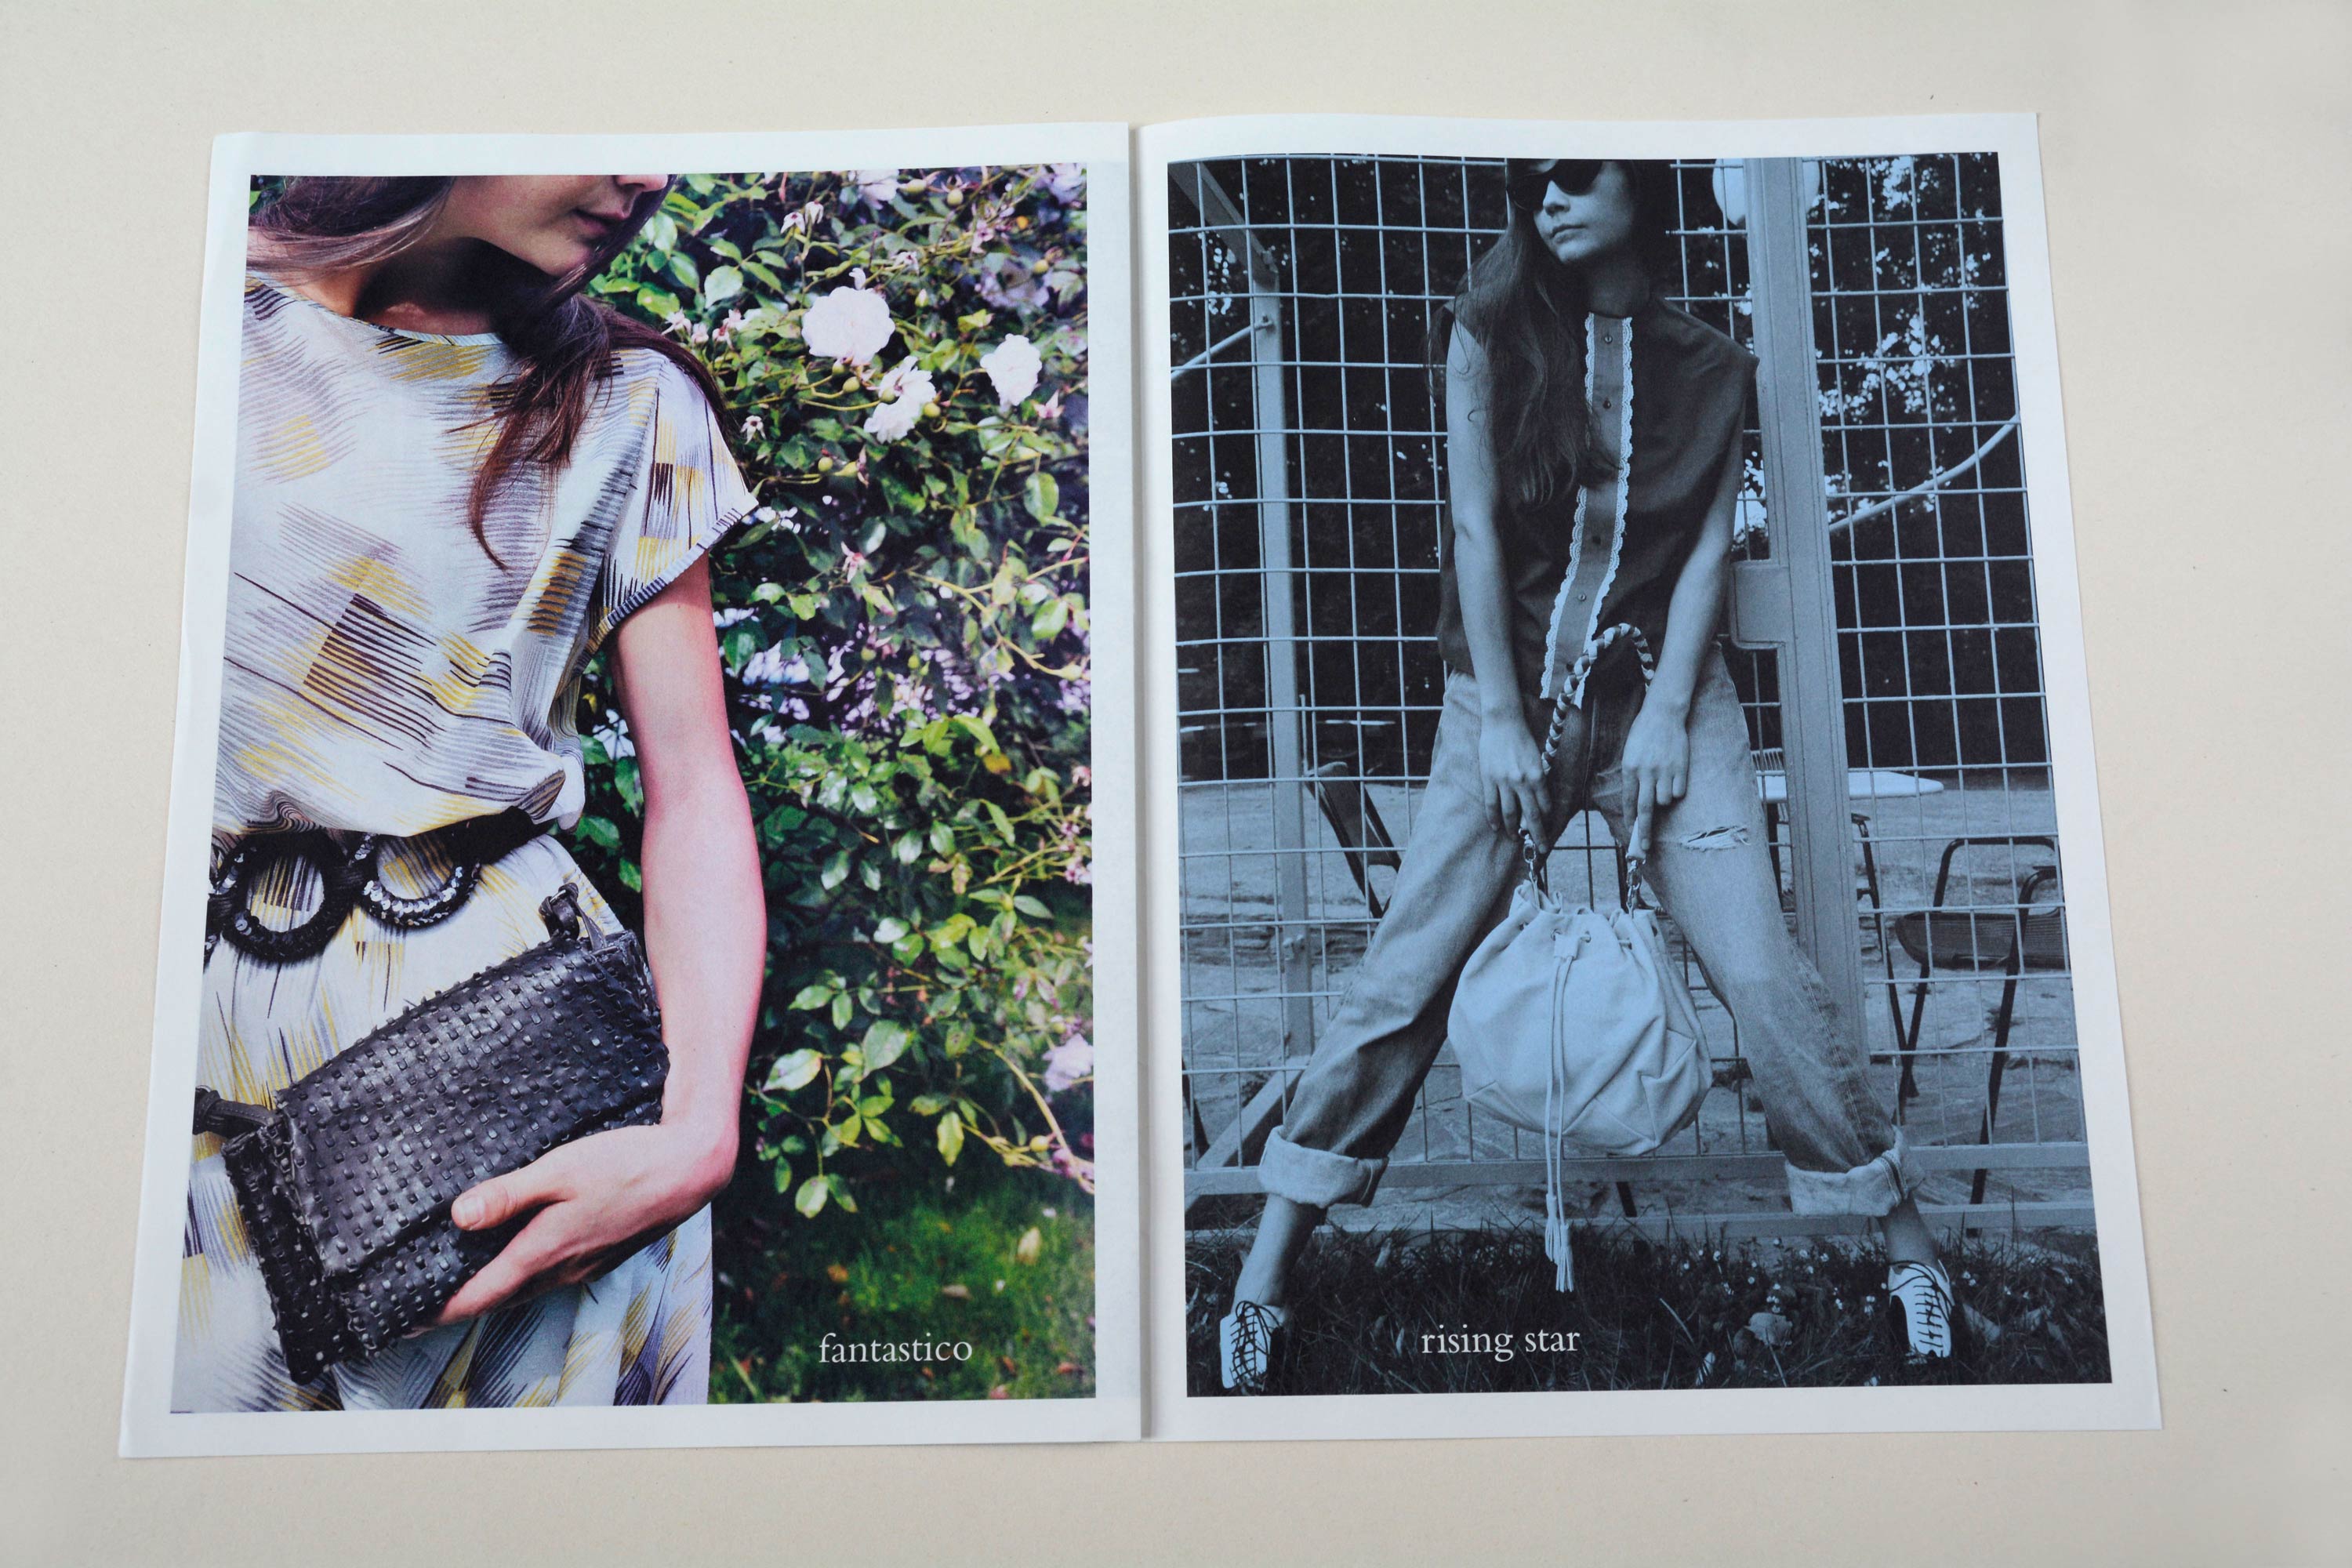 Double page. Full-page photos with white space around. Small font at bottom overlayed. Left: Close-up of woman holding handbag in front of flowering bush. Right: Woman holding handbag in front of iron grid door.